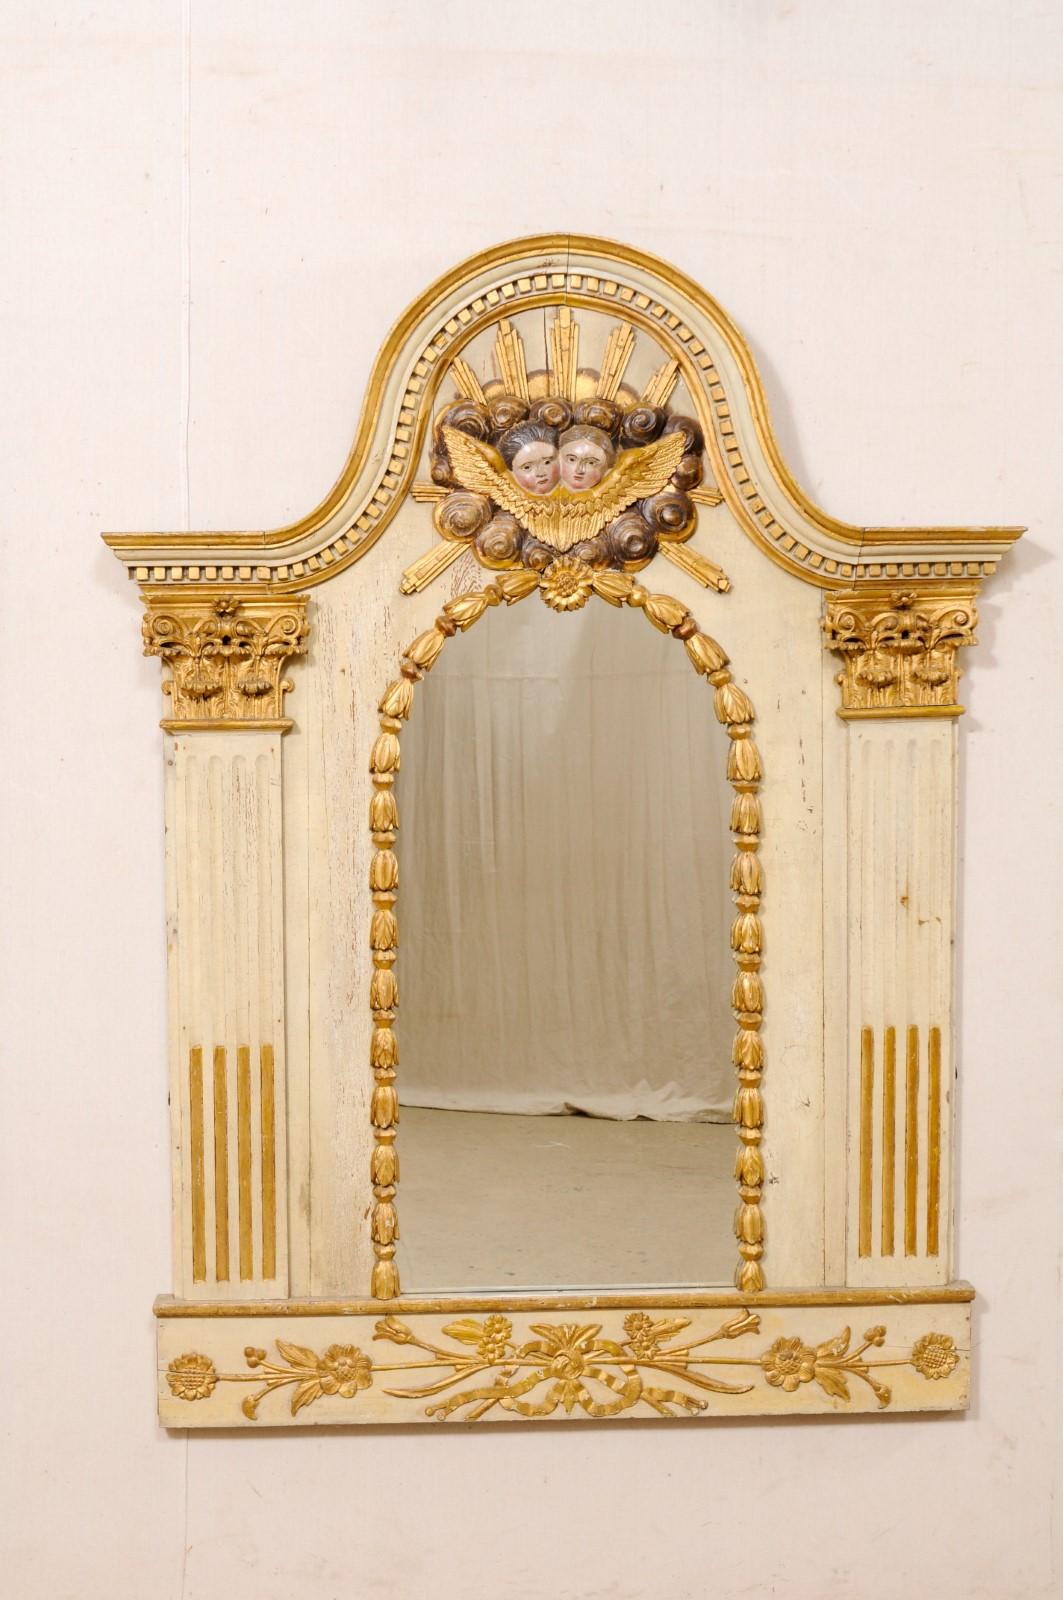 A French mirror with fabulous carvings and original paint & gilt from the turn of the 18th and 19th century. This antique mirror from France features an exaggerated arch pediment top with dentil molding beneath the top trim and pair of rosy-cheeked